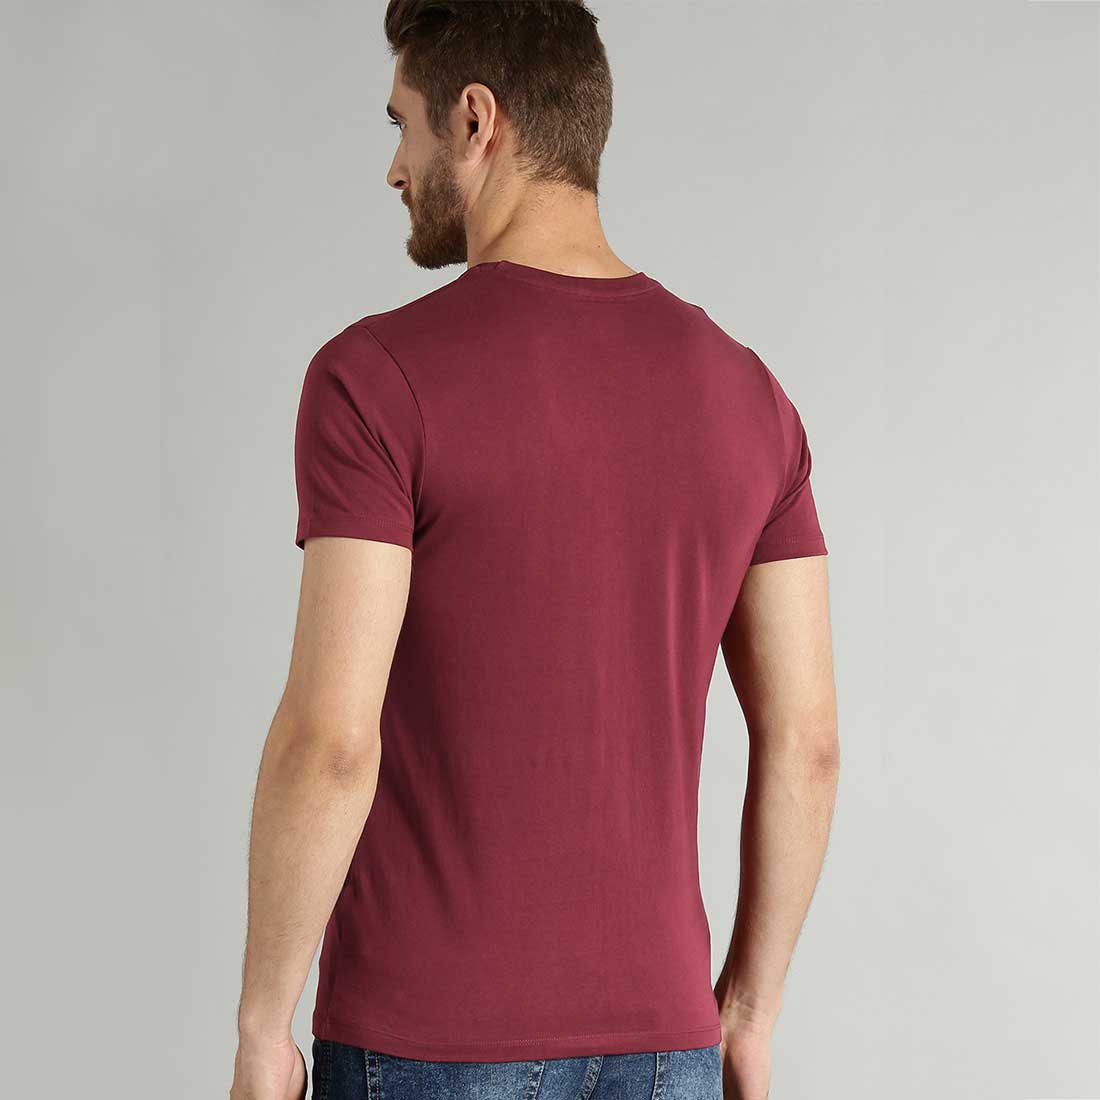 The Code Father Men Maroon T Shirt